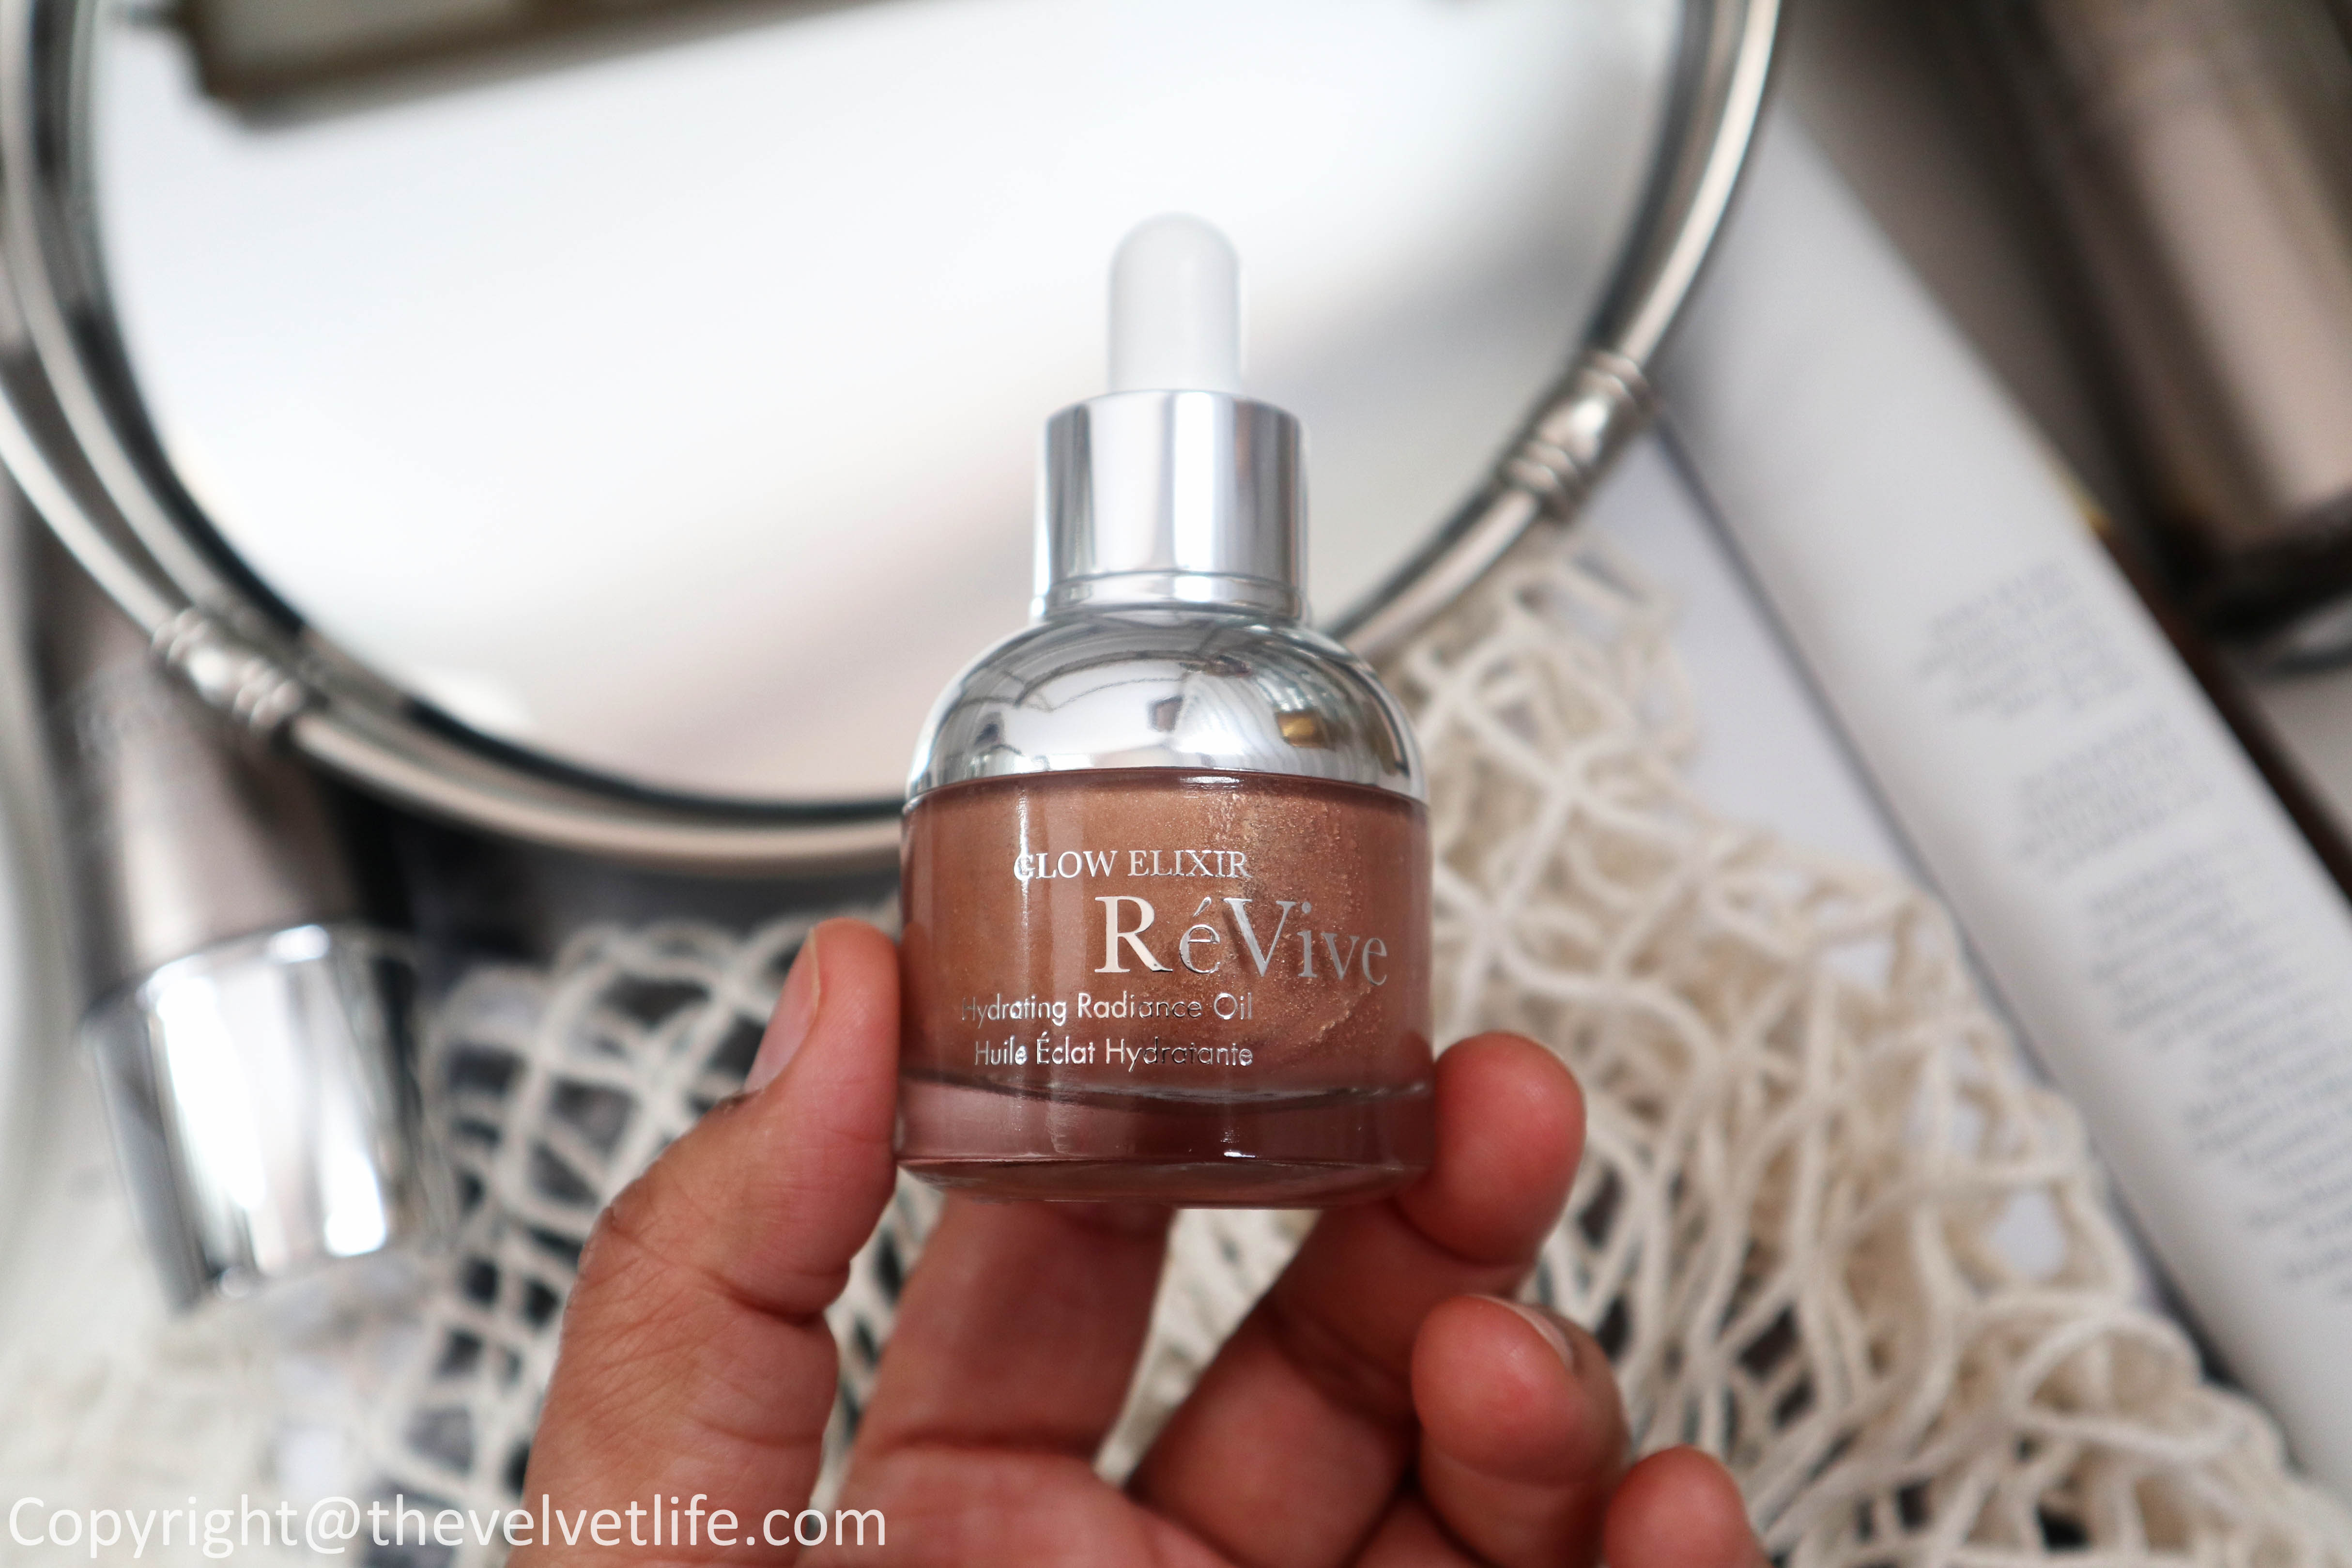 Review of new ReVive Skincare Glow Elixir Hydrating Radiance Oil, Soleil Superieur Broad Spectrum SPF 50 Sunscreen PA ++++ , Soleil Superieur Body, Perfectif Even Skin Tone Cream, Defensif Environmental Antioxidant Booster, Masque de Radiance